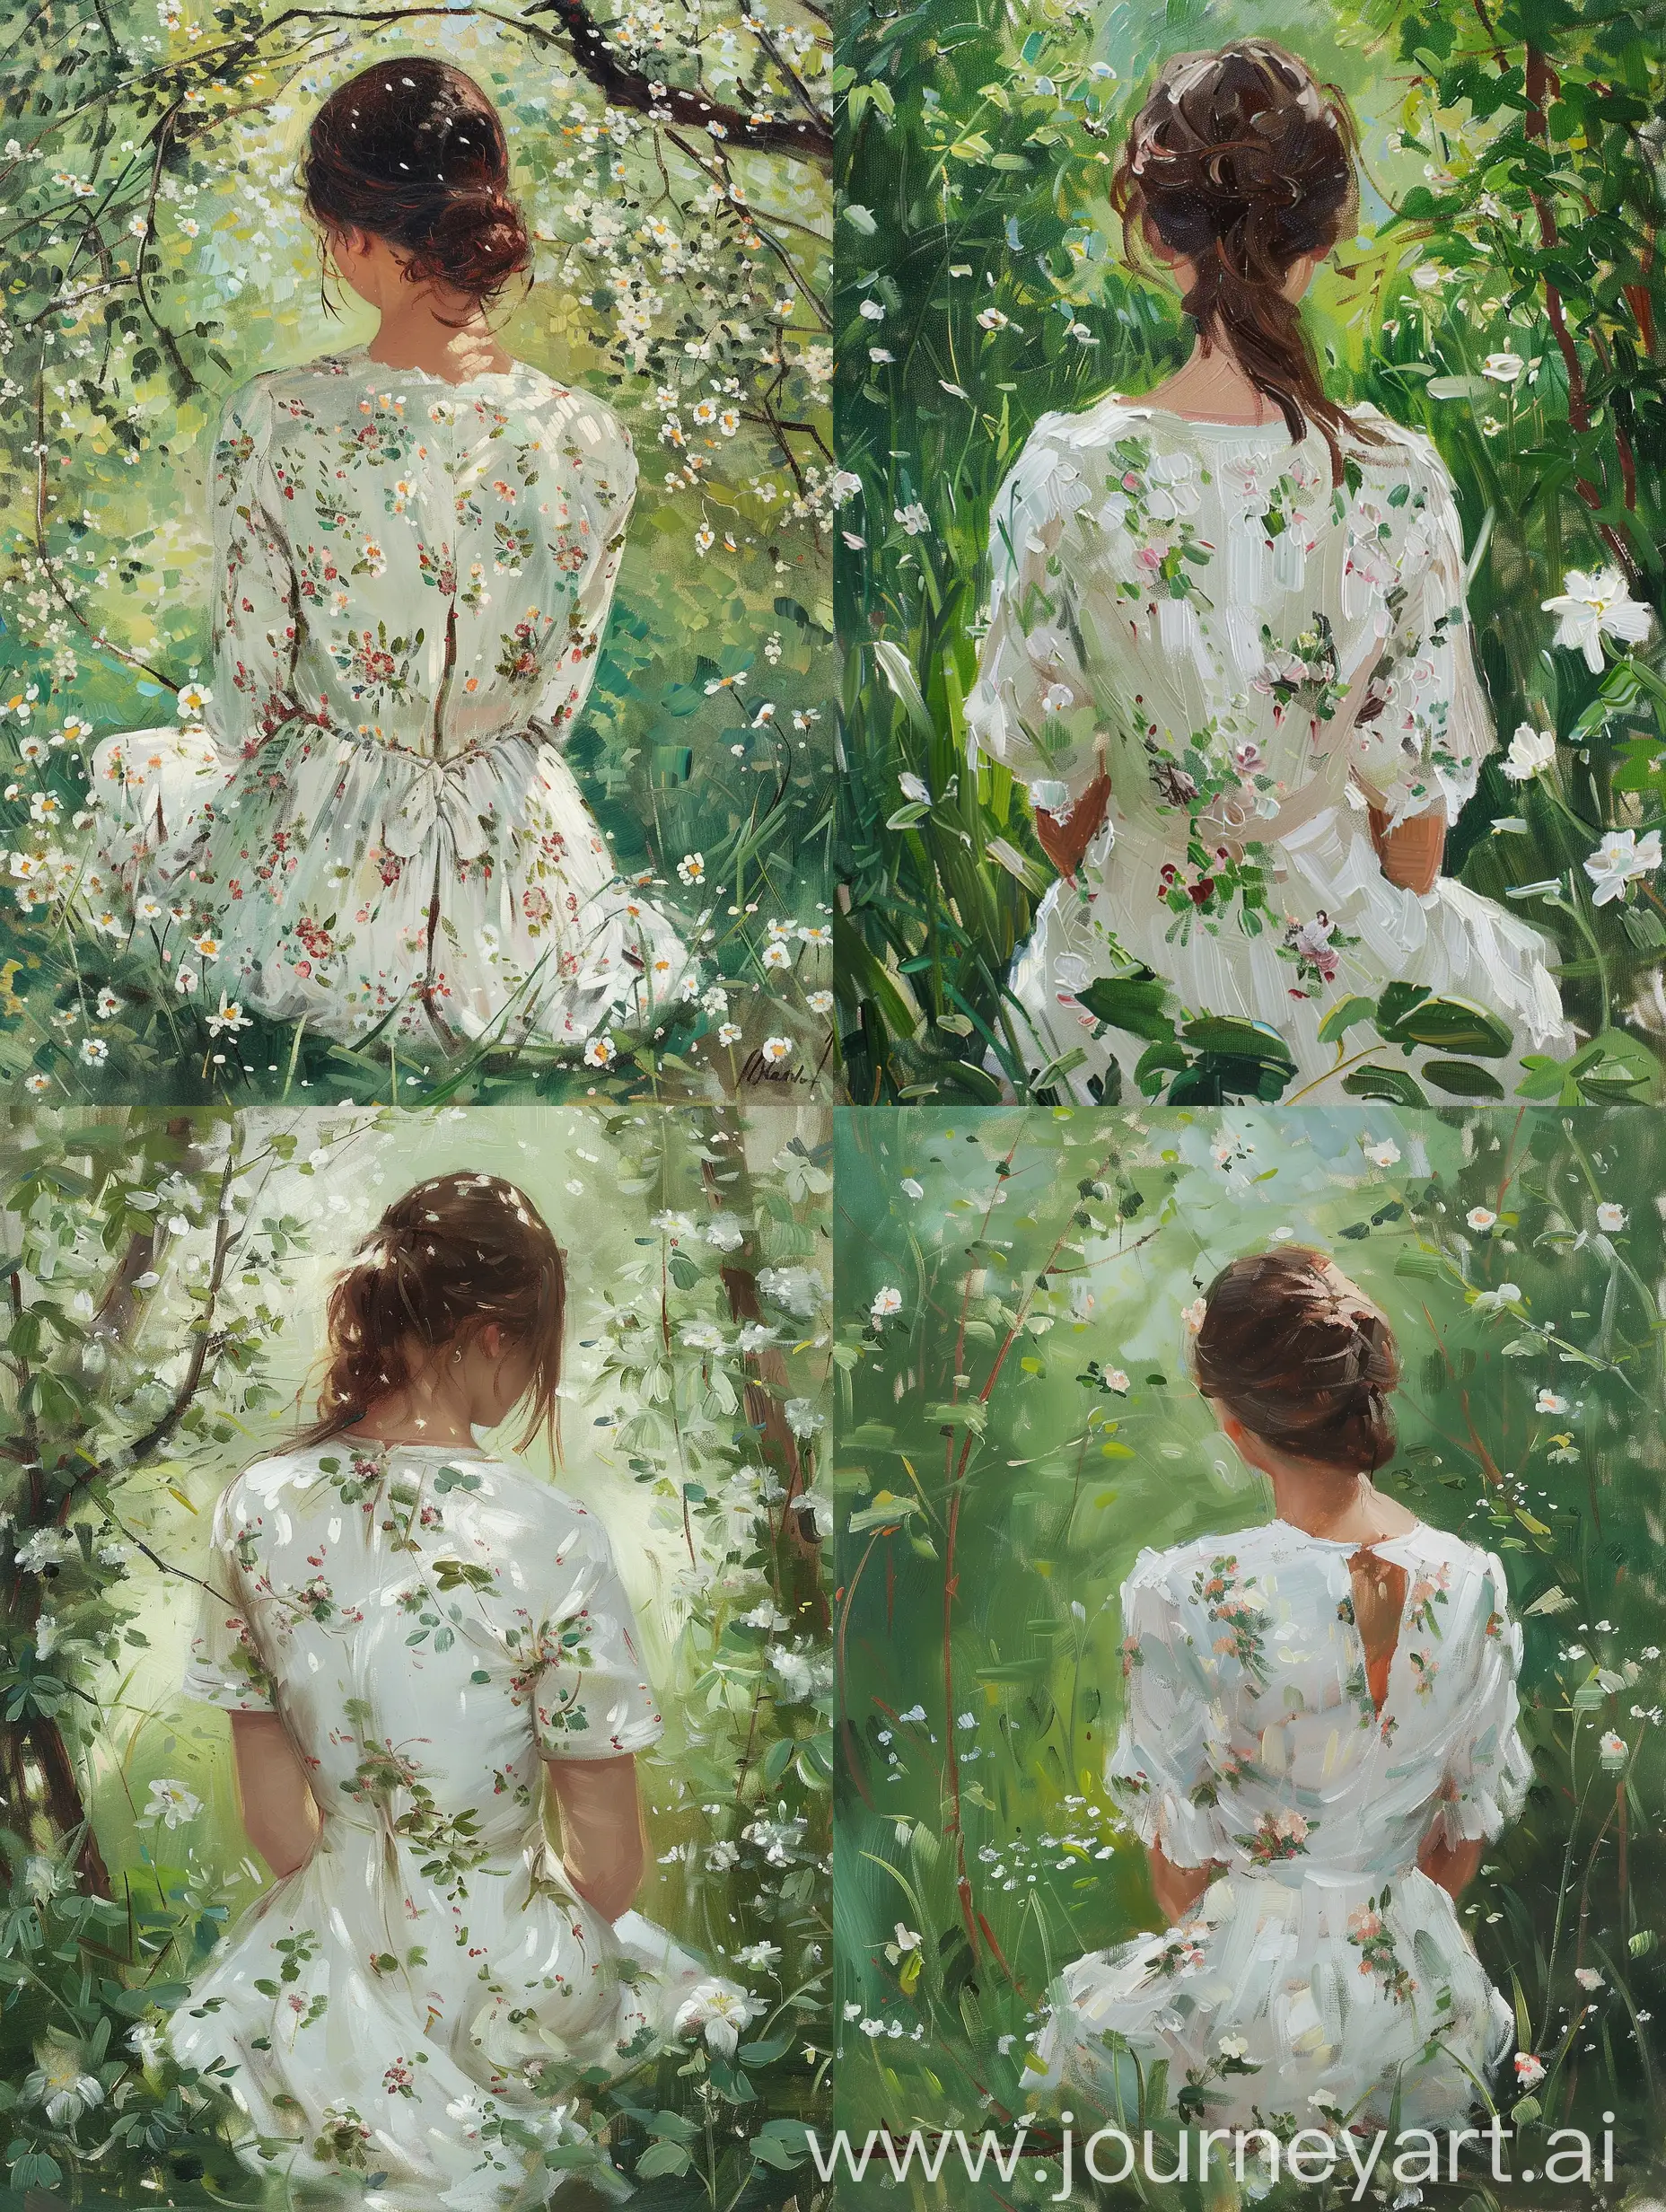 Impressionism painting of a British woman wearing white floral dress sitting under Meadow in greenery and white Lil flowers vintage painting impressionism visible brush strokes portrait high resolution back view of lady standing in cool Breeze 